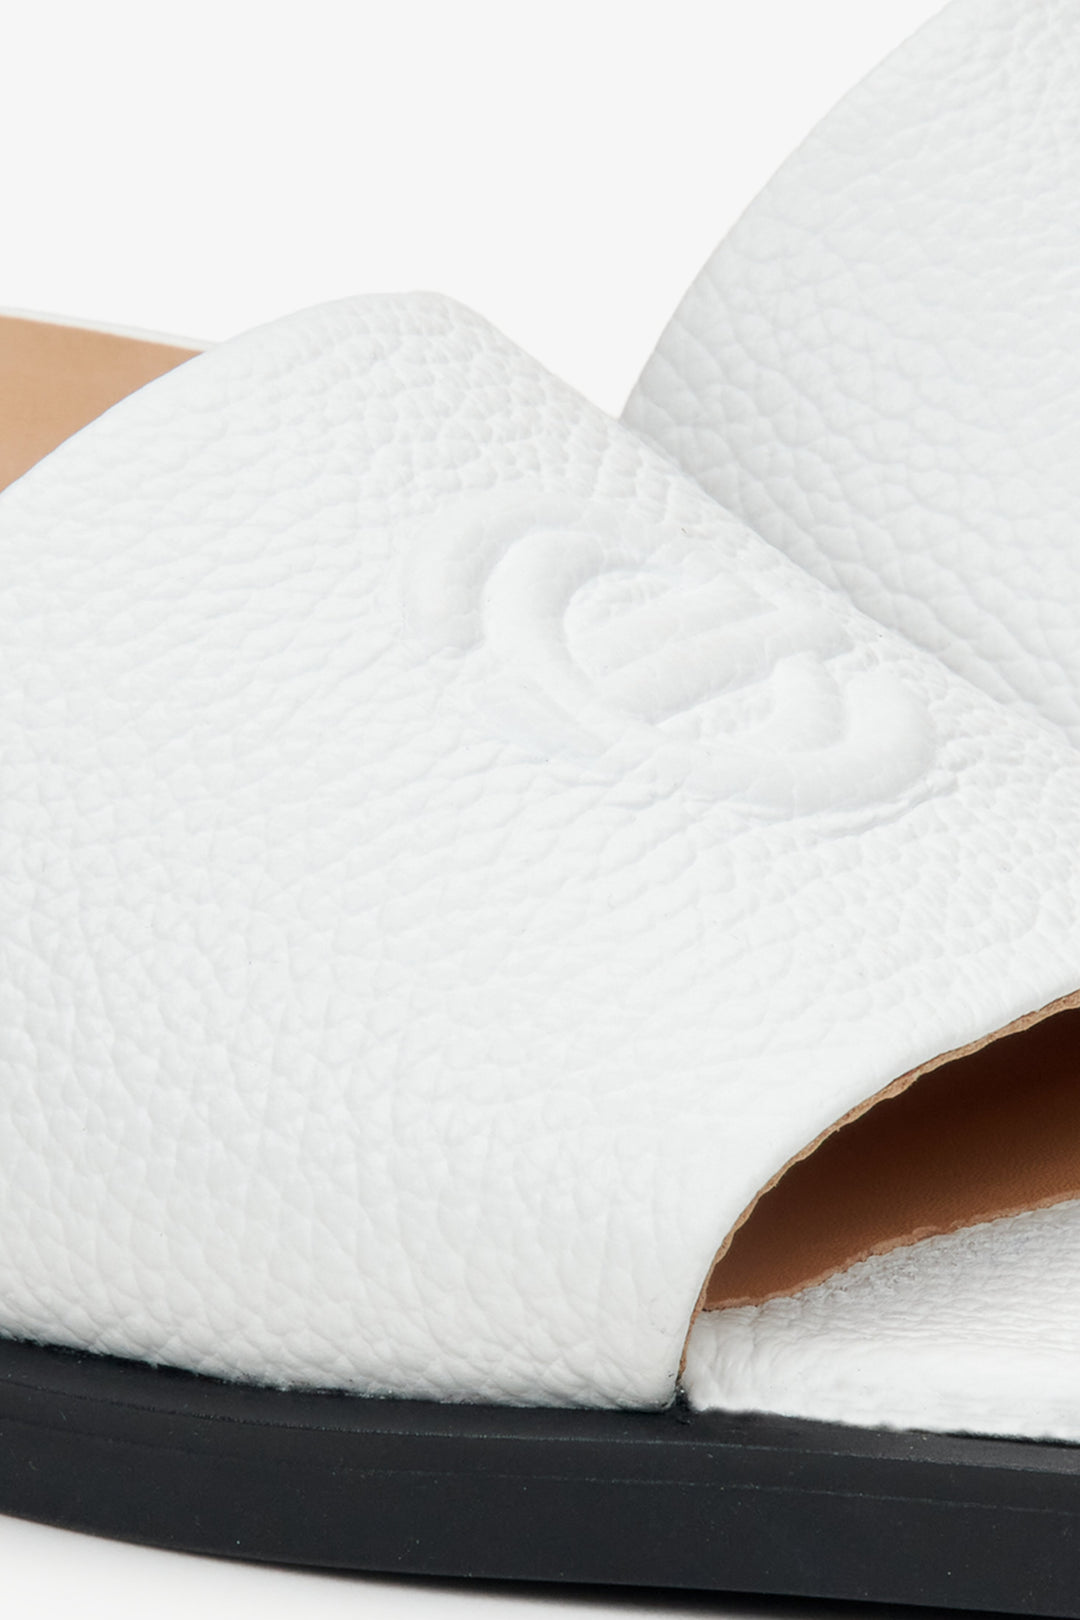 Women's white flip-flops made of genuine leather by Estro - close-up on the details.